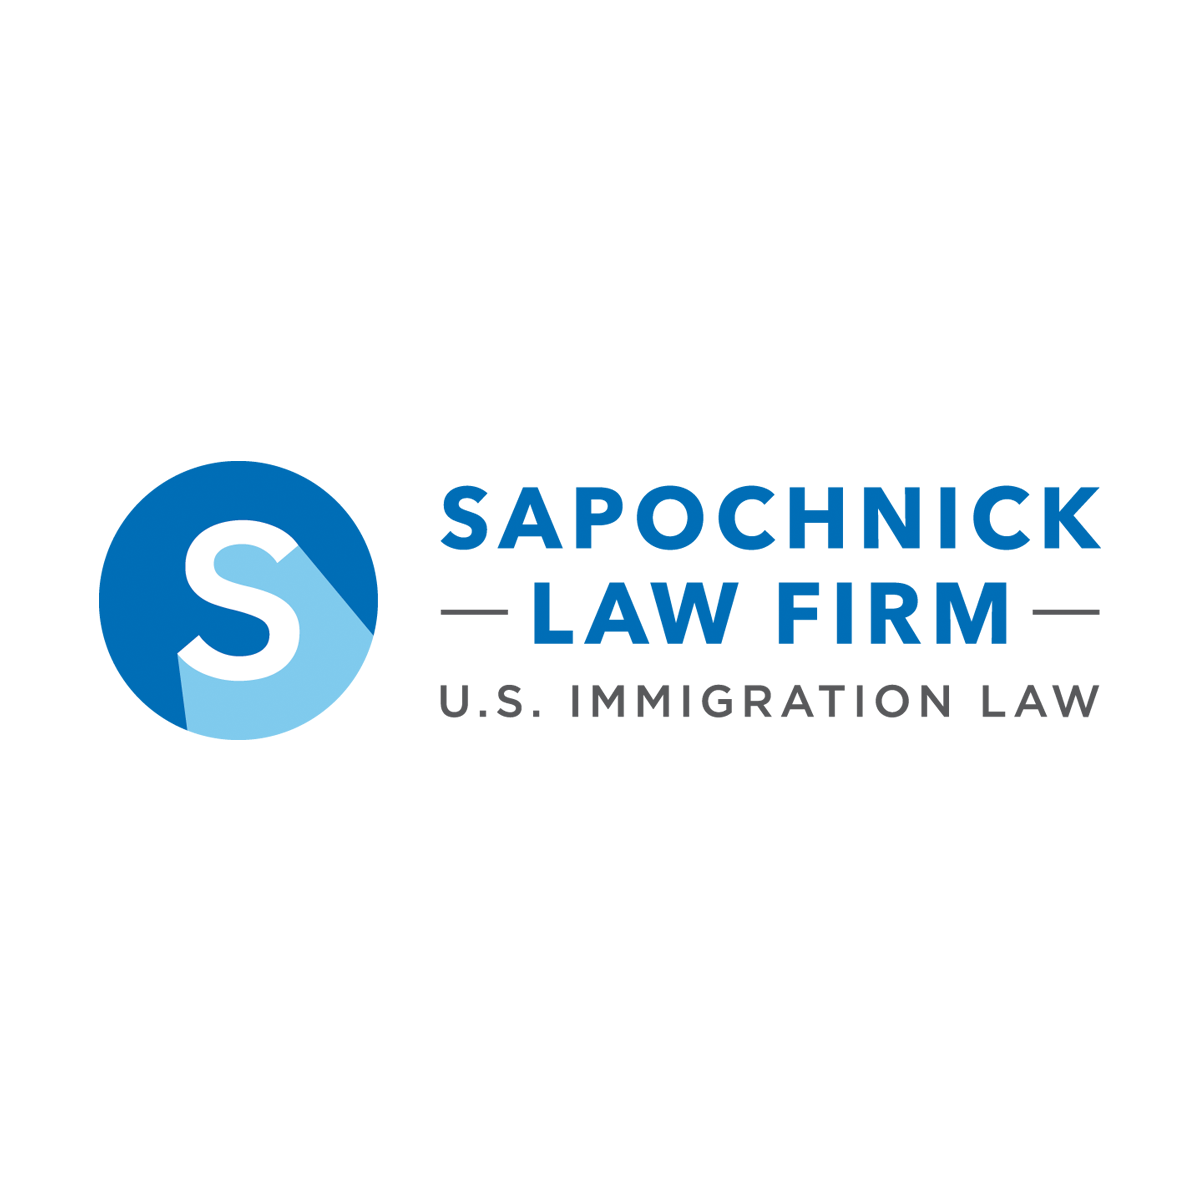 Immigration Update: USCIS Extends Evidence of Status for Conditional Permanent Residents Filing I-751 or I-829, and Important Warnings for Divorced Applicants